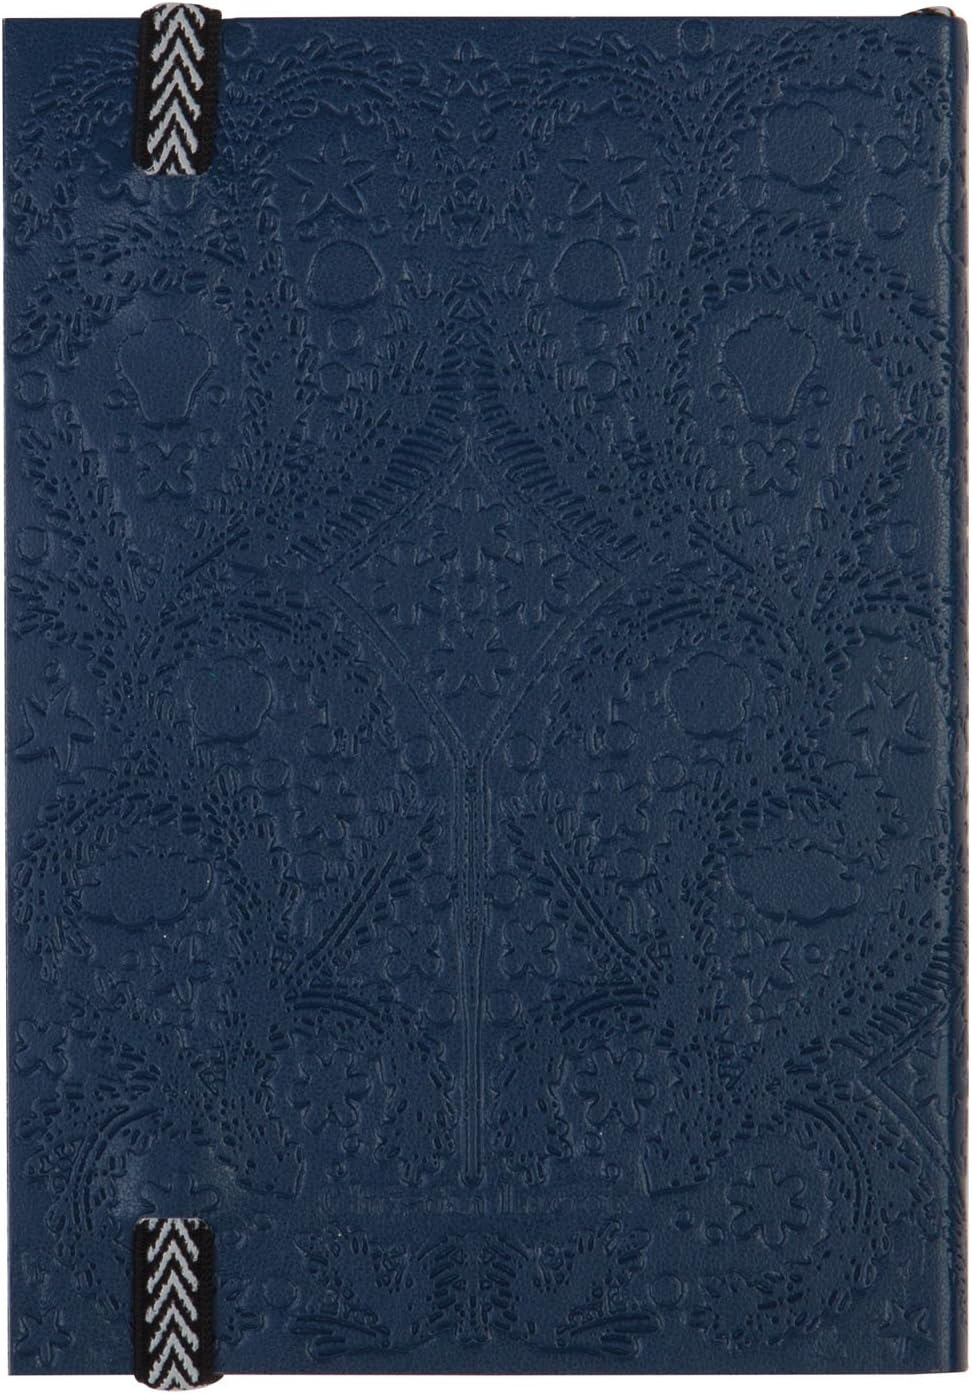 Christian Lacroix Navy A6 6" X 4.25" Paseo Notebook